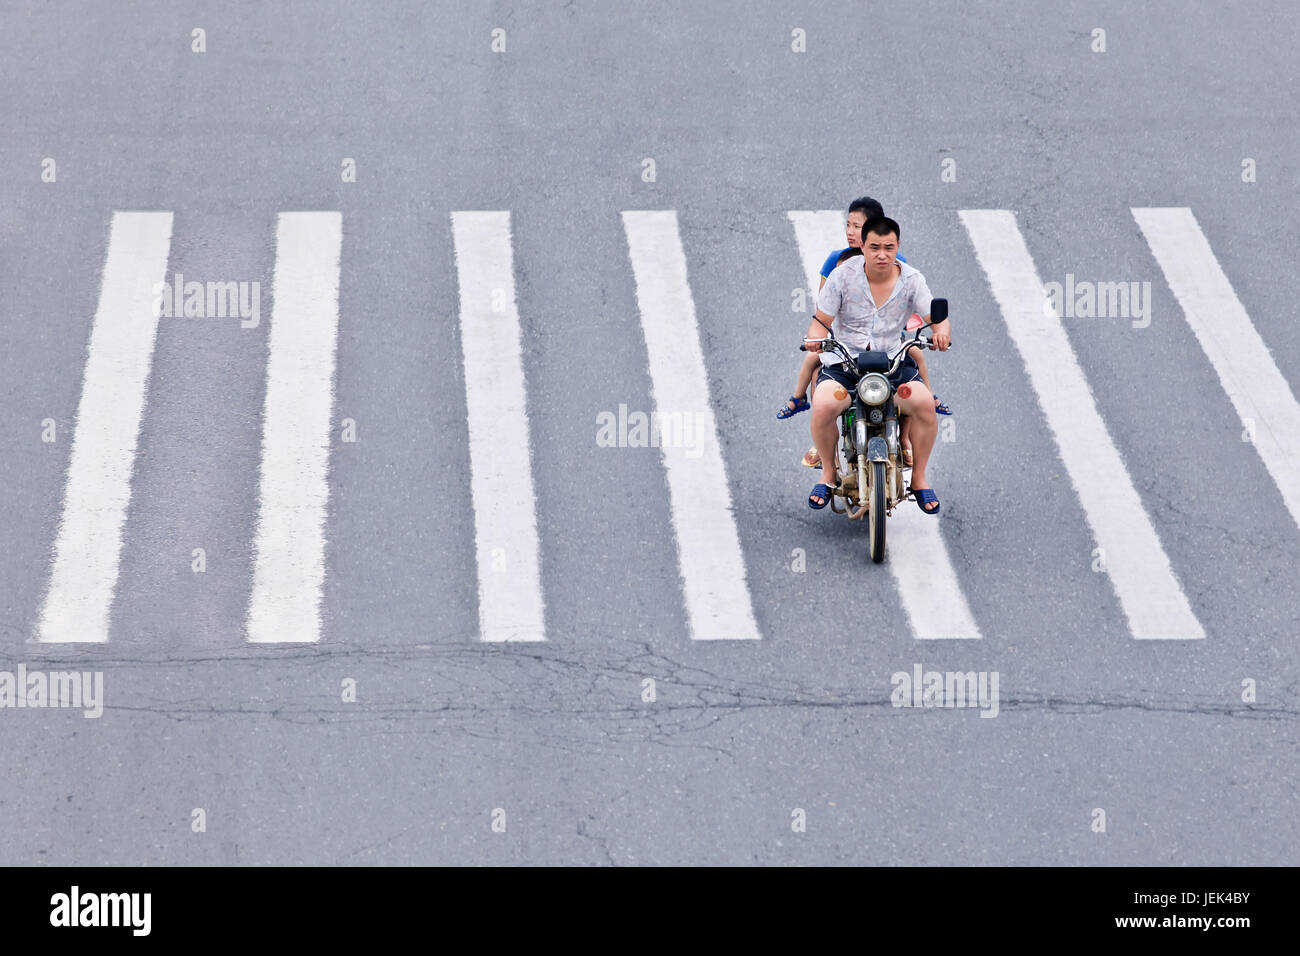 YANTAI-CHINA-JULY 18. Man on motorcycle crossing zebra path. Chinese motorcycle market is shrinking because of the ban on motorcycles. Stock Photo